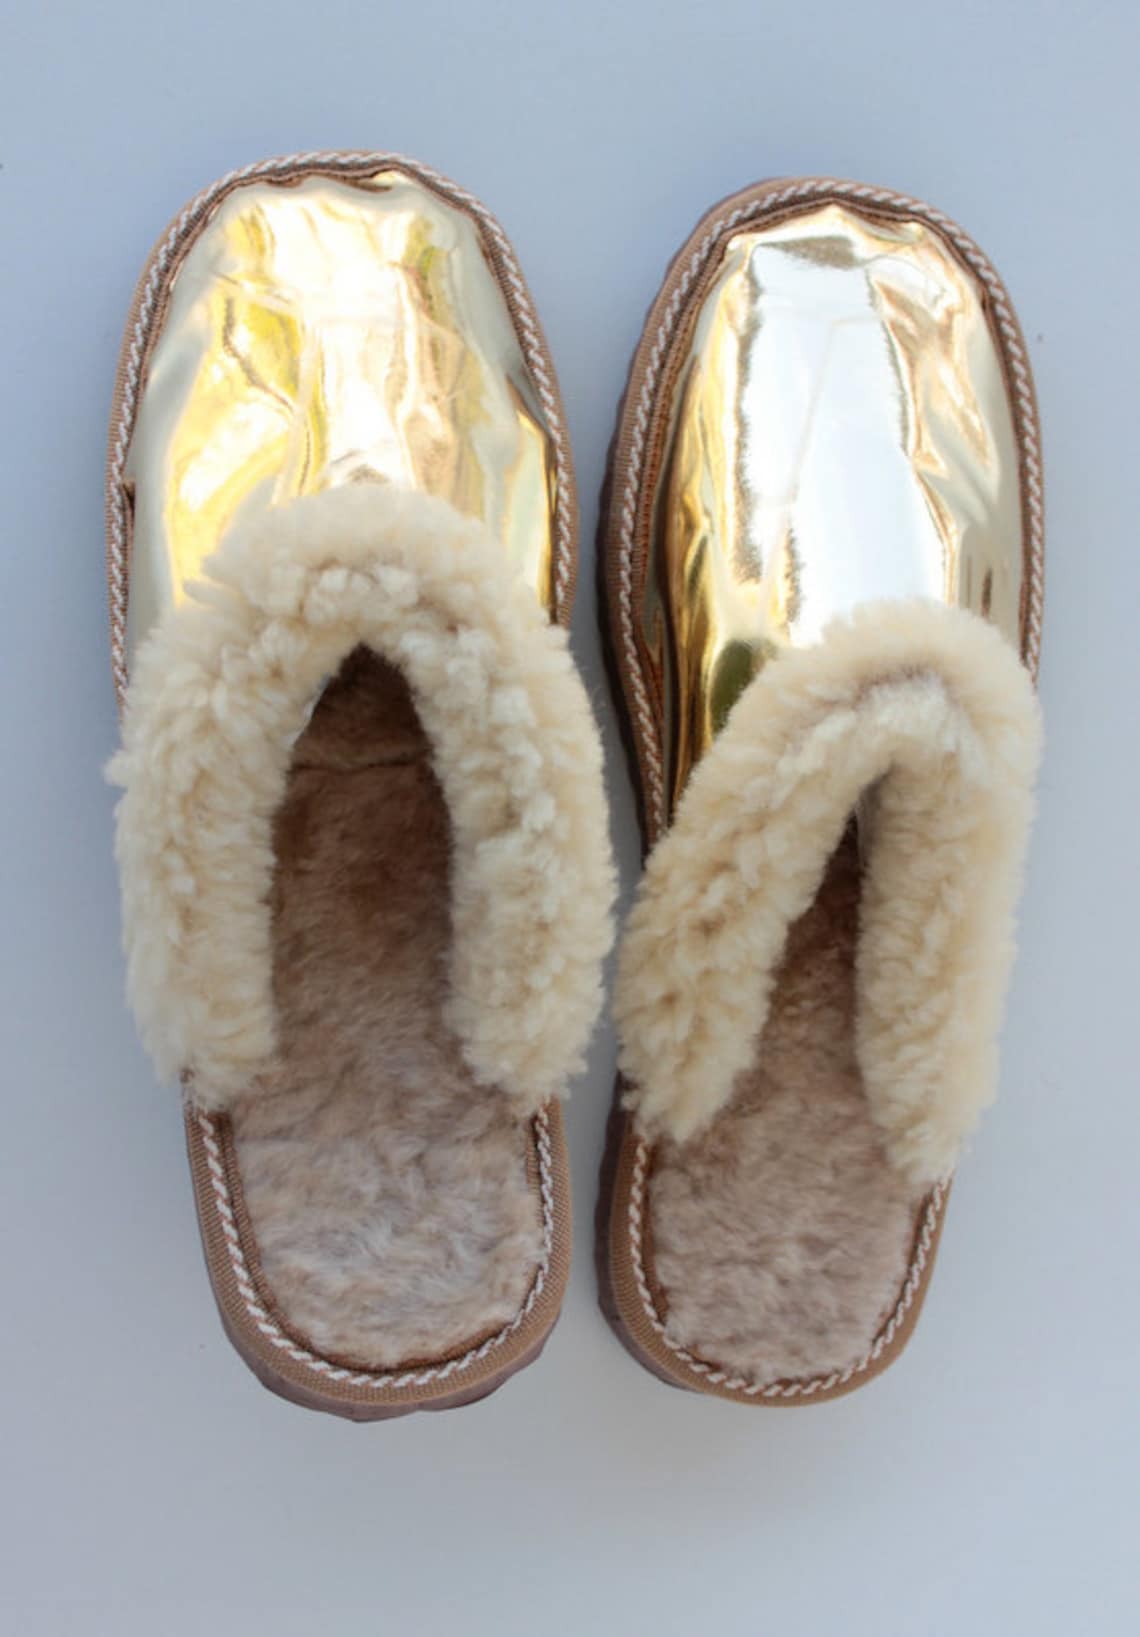 Women Gold Slippers Made of Leather and Fur on Top. the Inside - Etsy